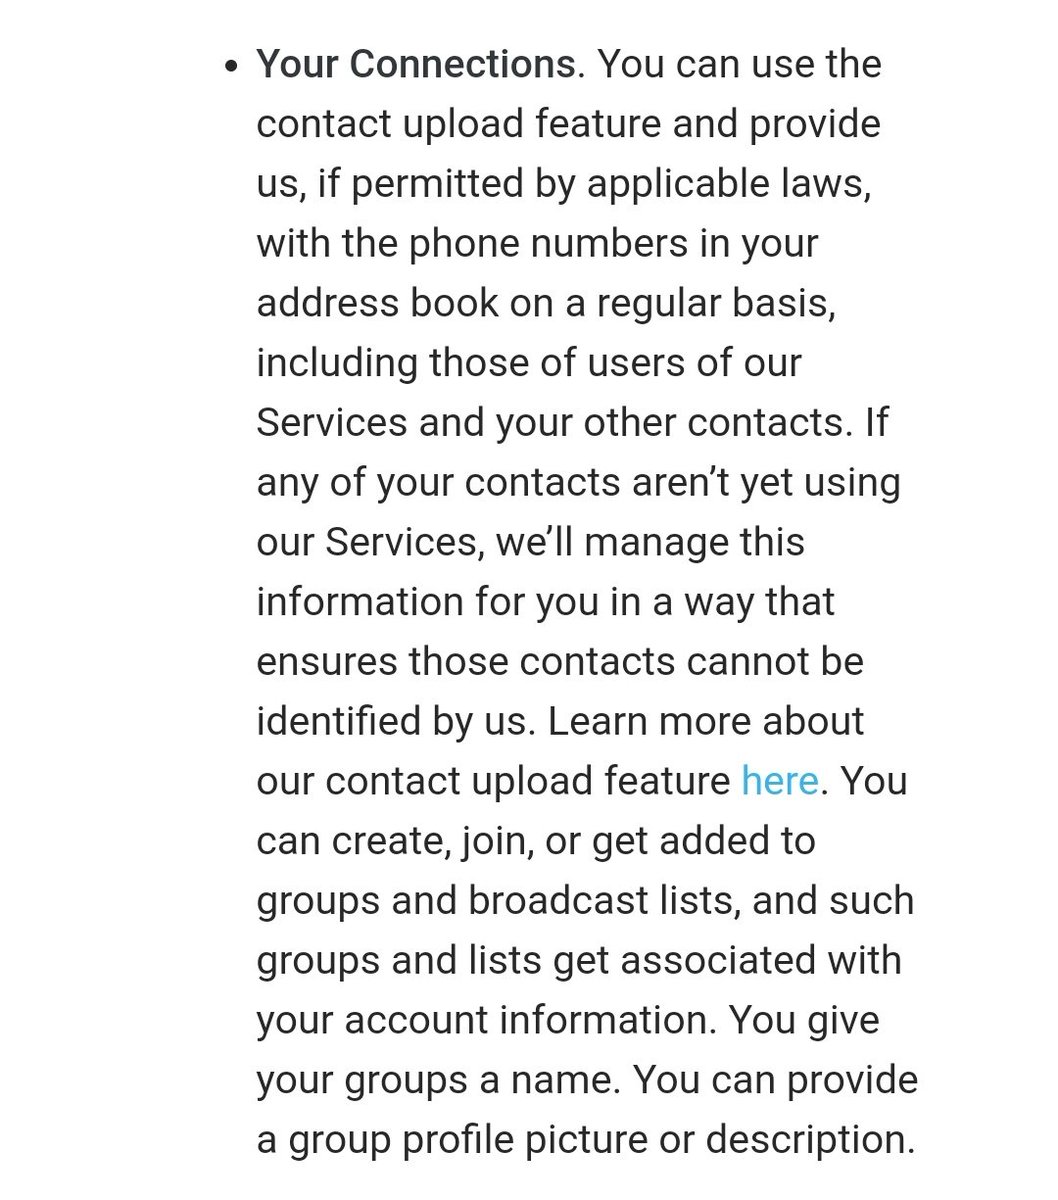  #WhatsApp can also read your contacts list. And incase someone who doesn't use WhatsApp is on that list, Whatsapp will manage the contact information "in a way that ensures those contacts cannot be identified by it."